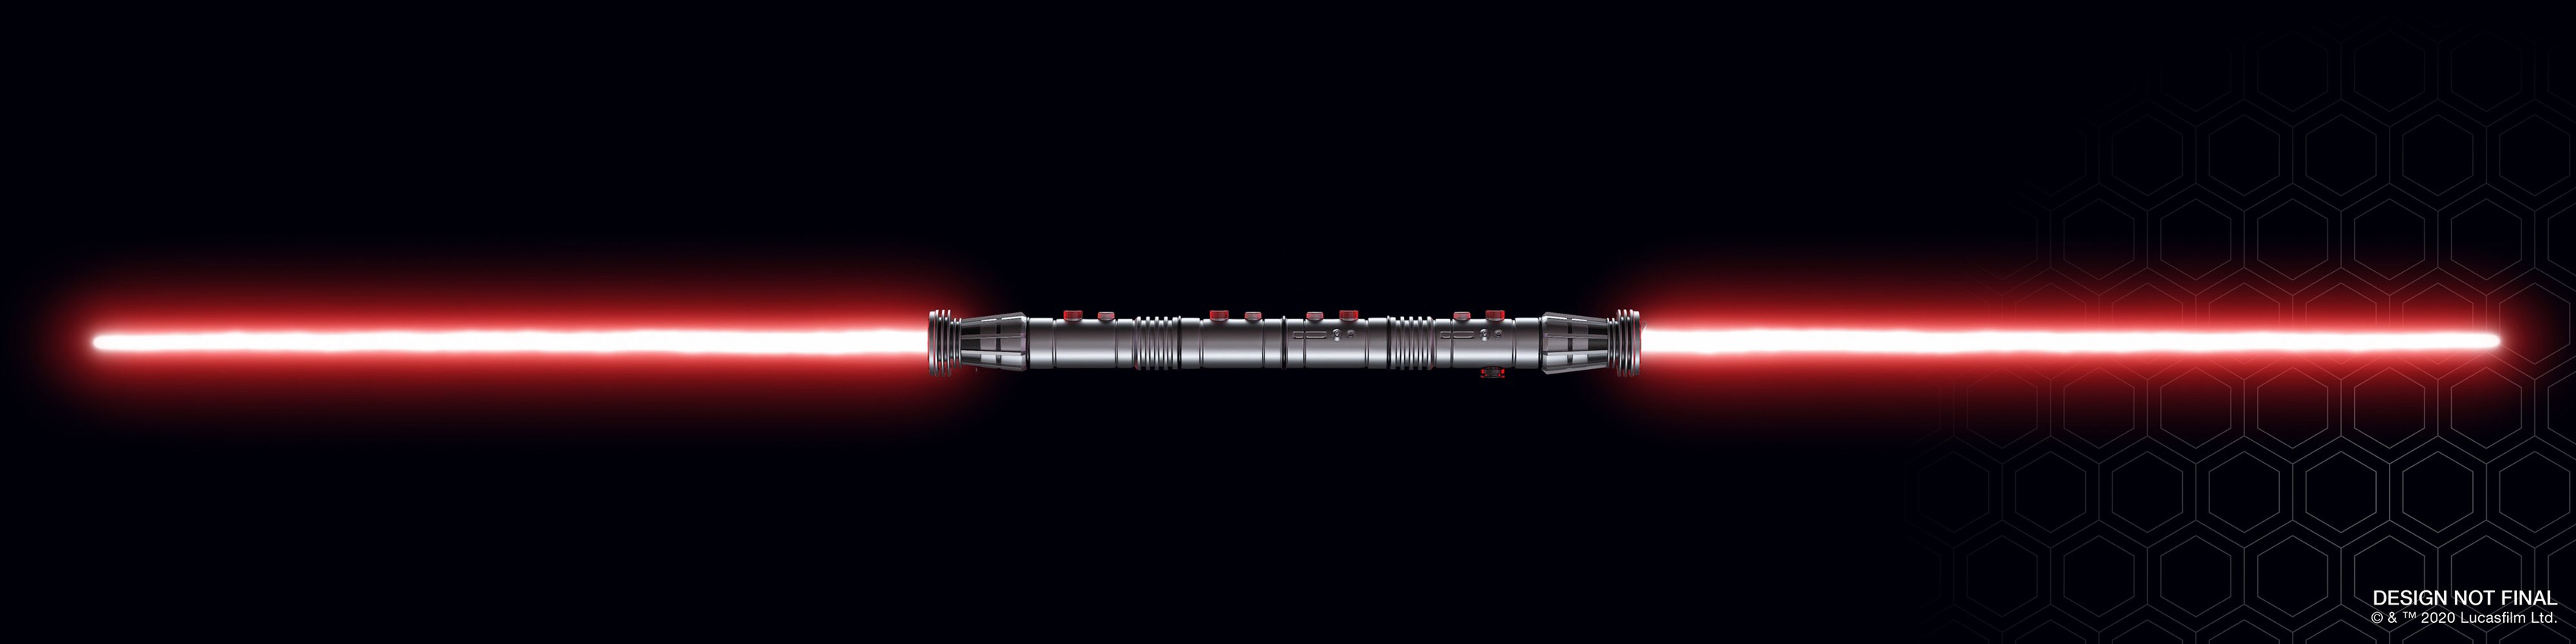 Star Wars: The Lightsaber Collection- Prototype Shown View 5